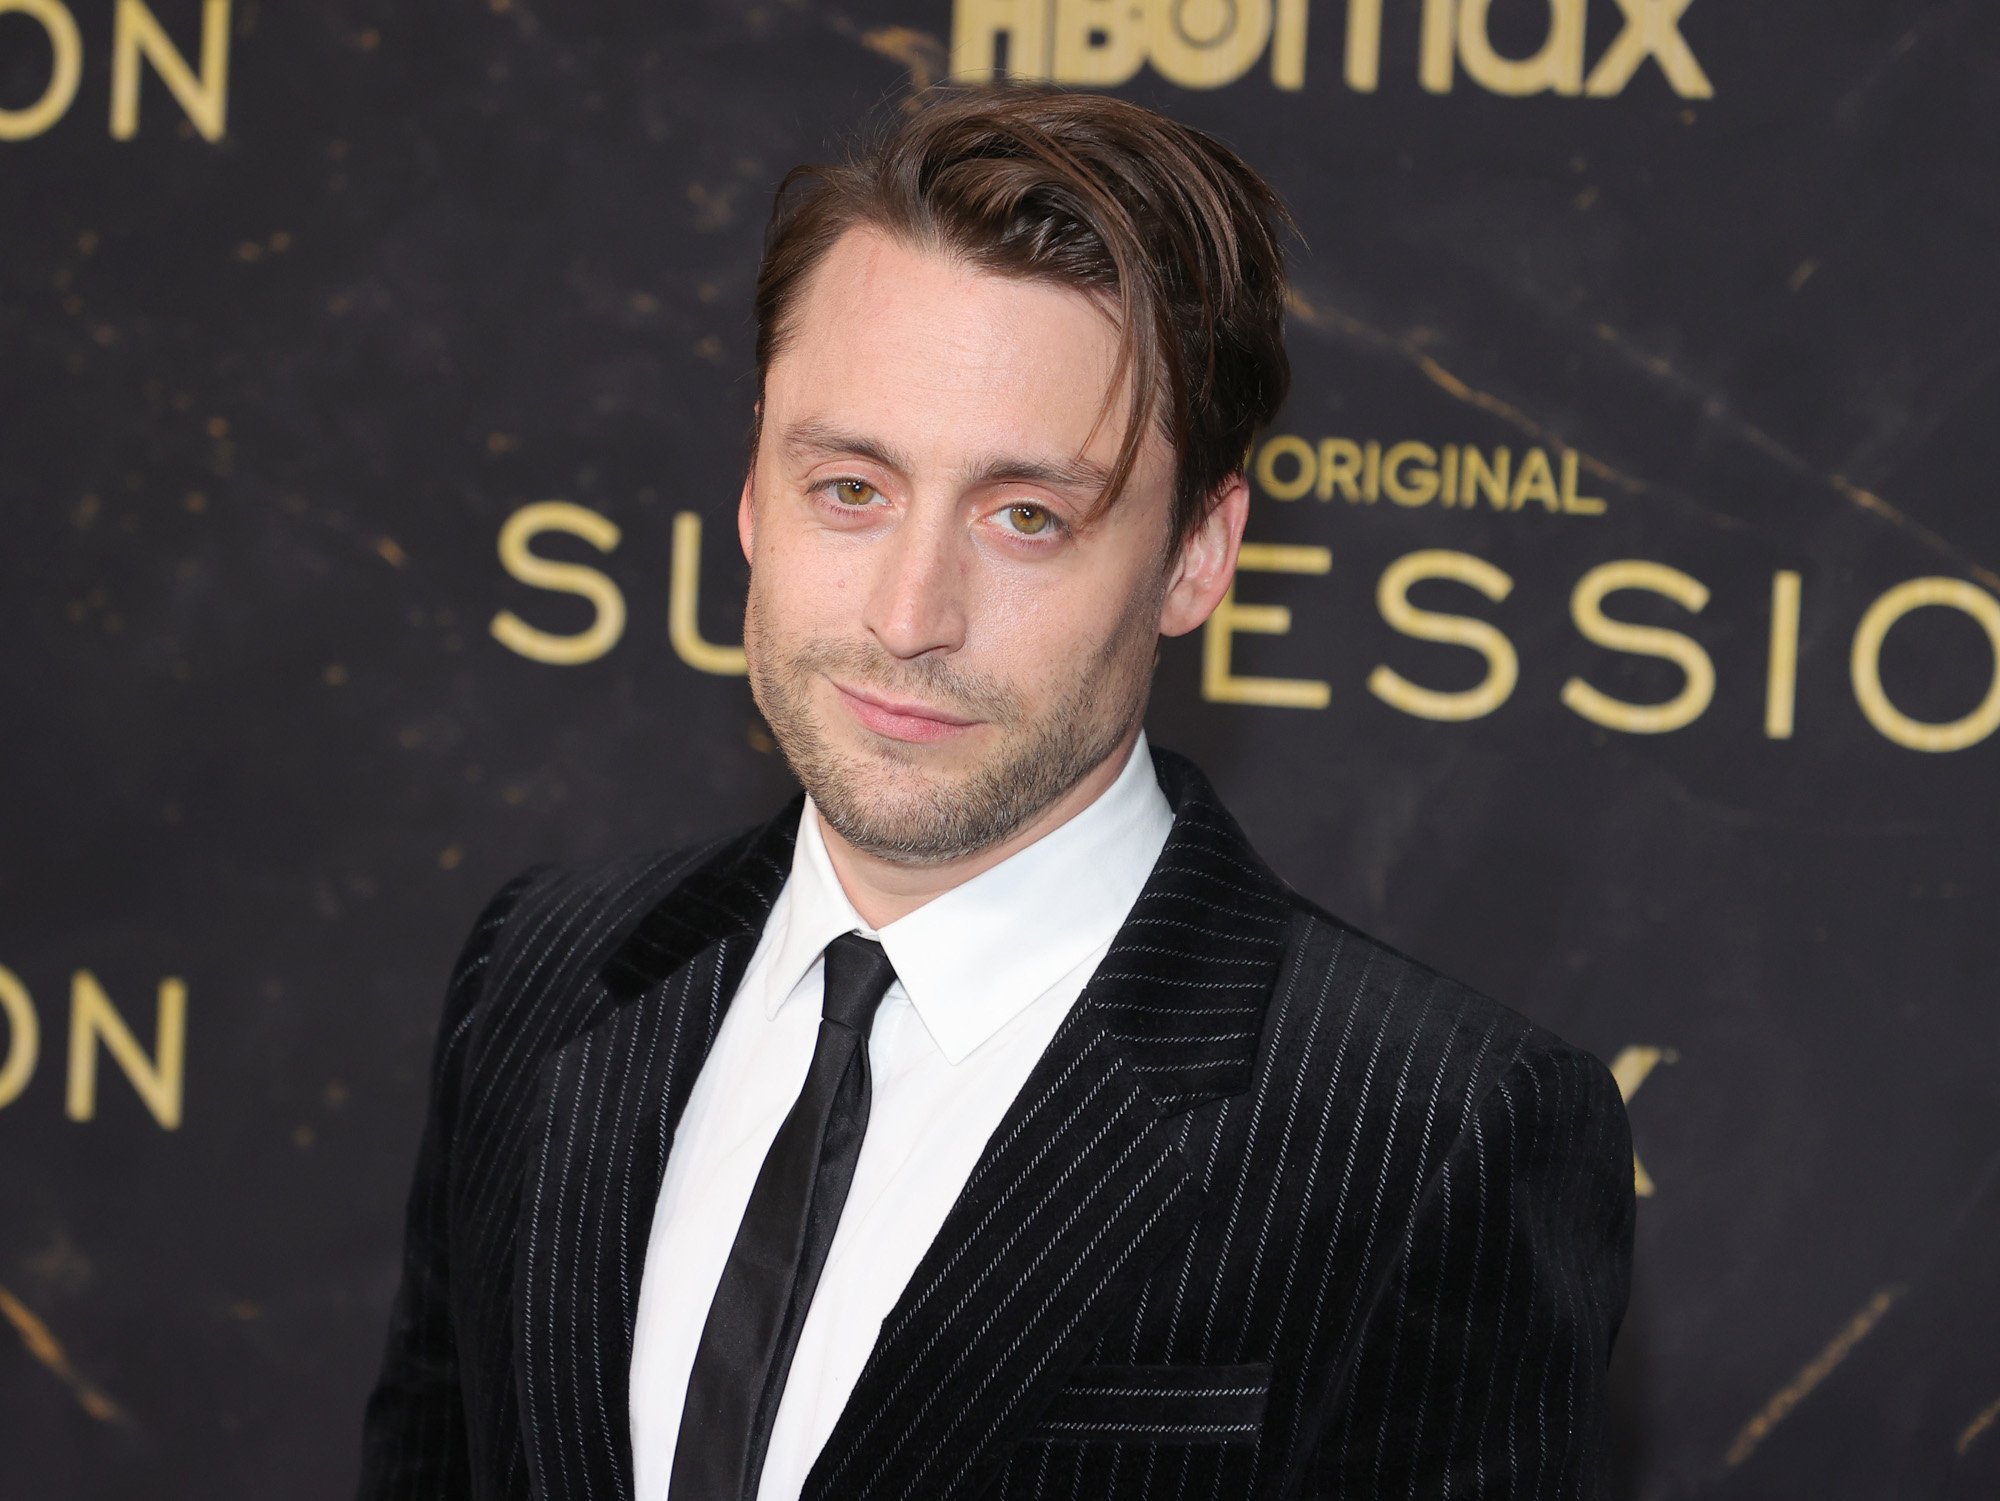 'Succession' star Kieran Culkin, who plays Roman Roy on the HBO show. He's wearing a white shirt and black suit and standing in front of a 'Succession' wall.